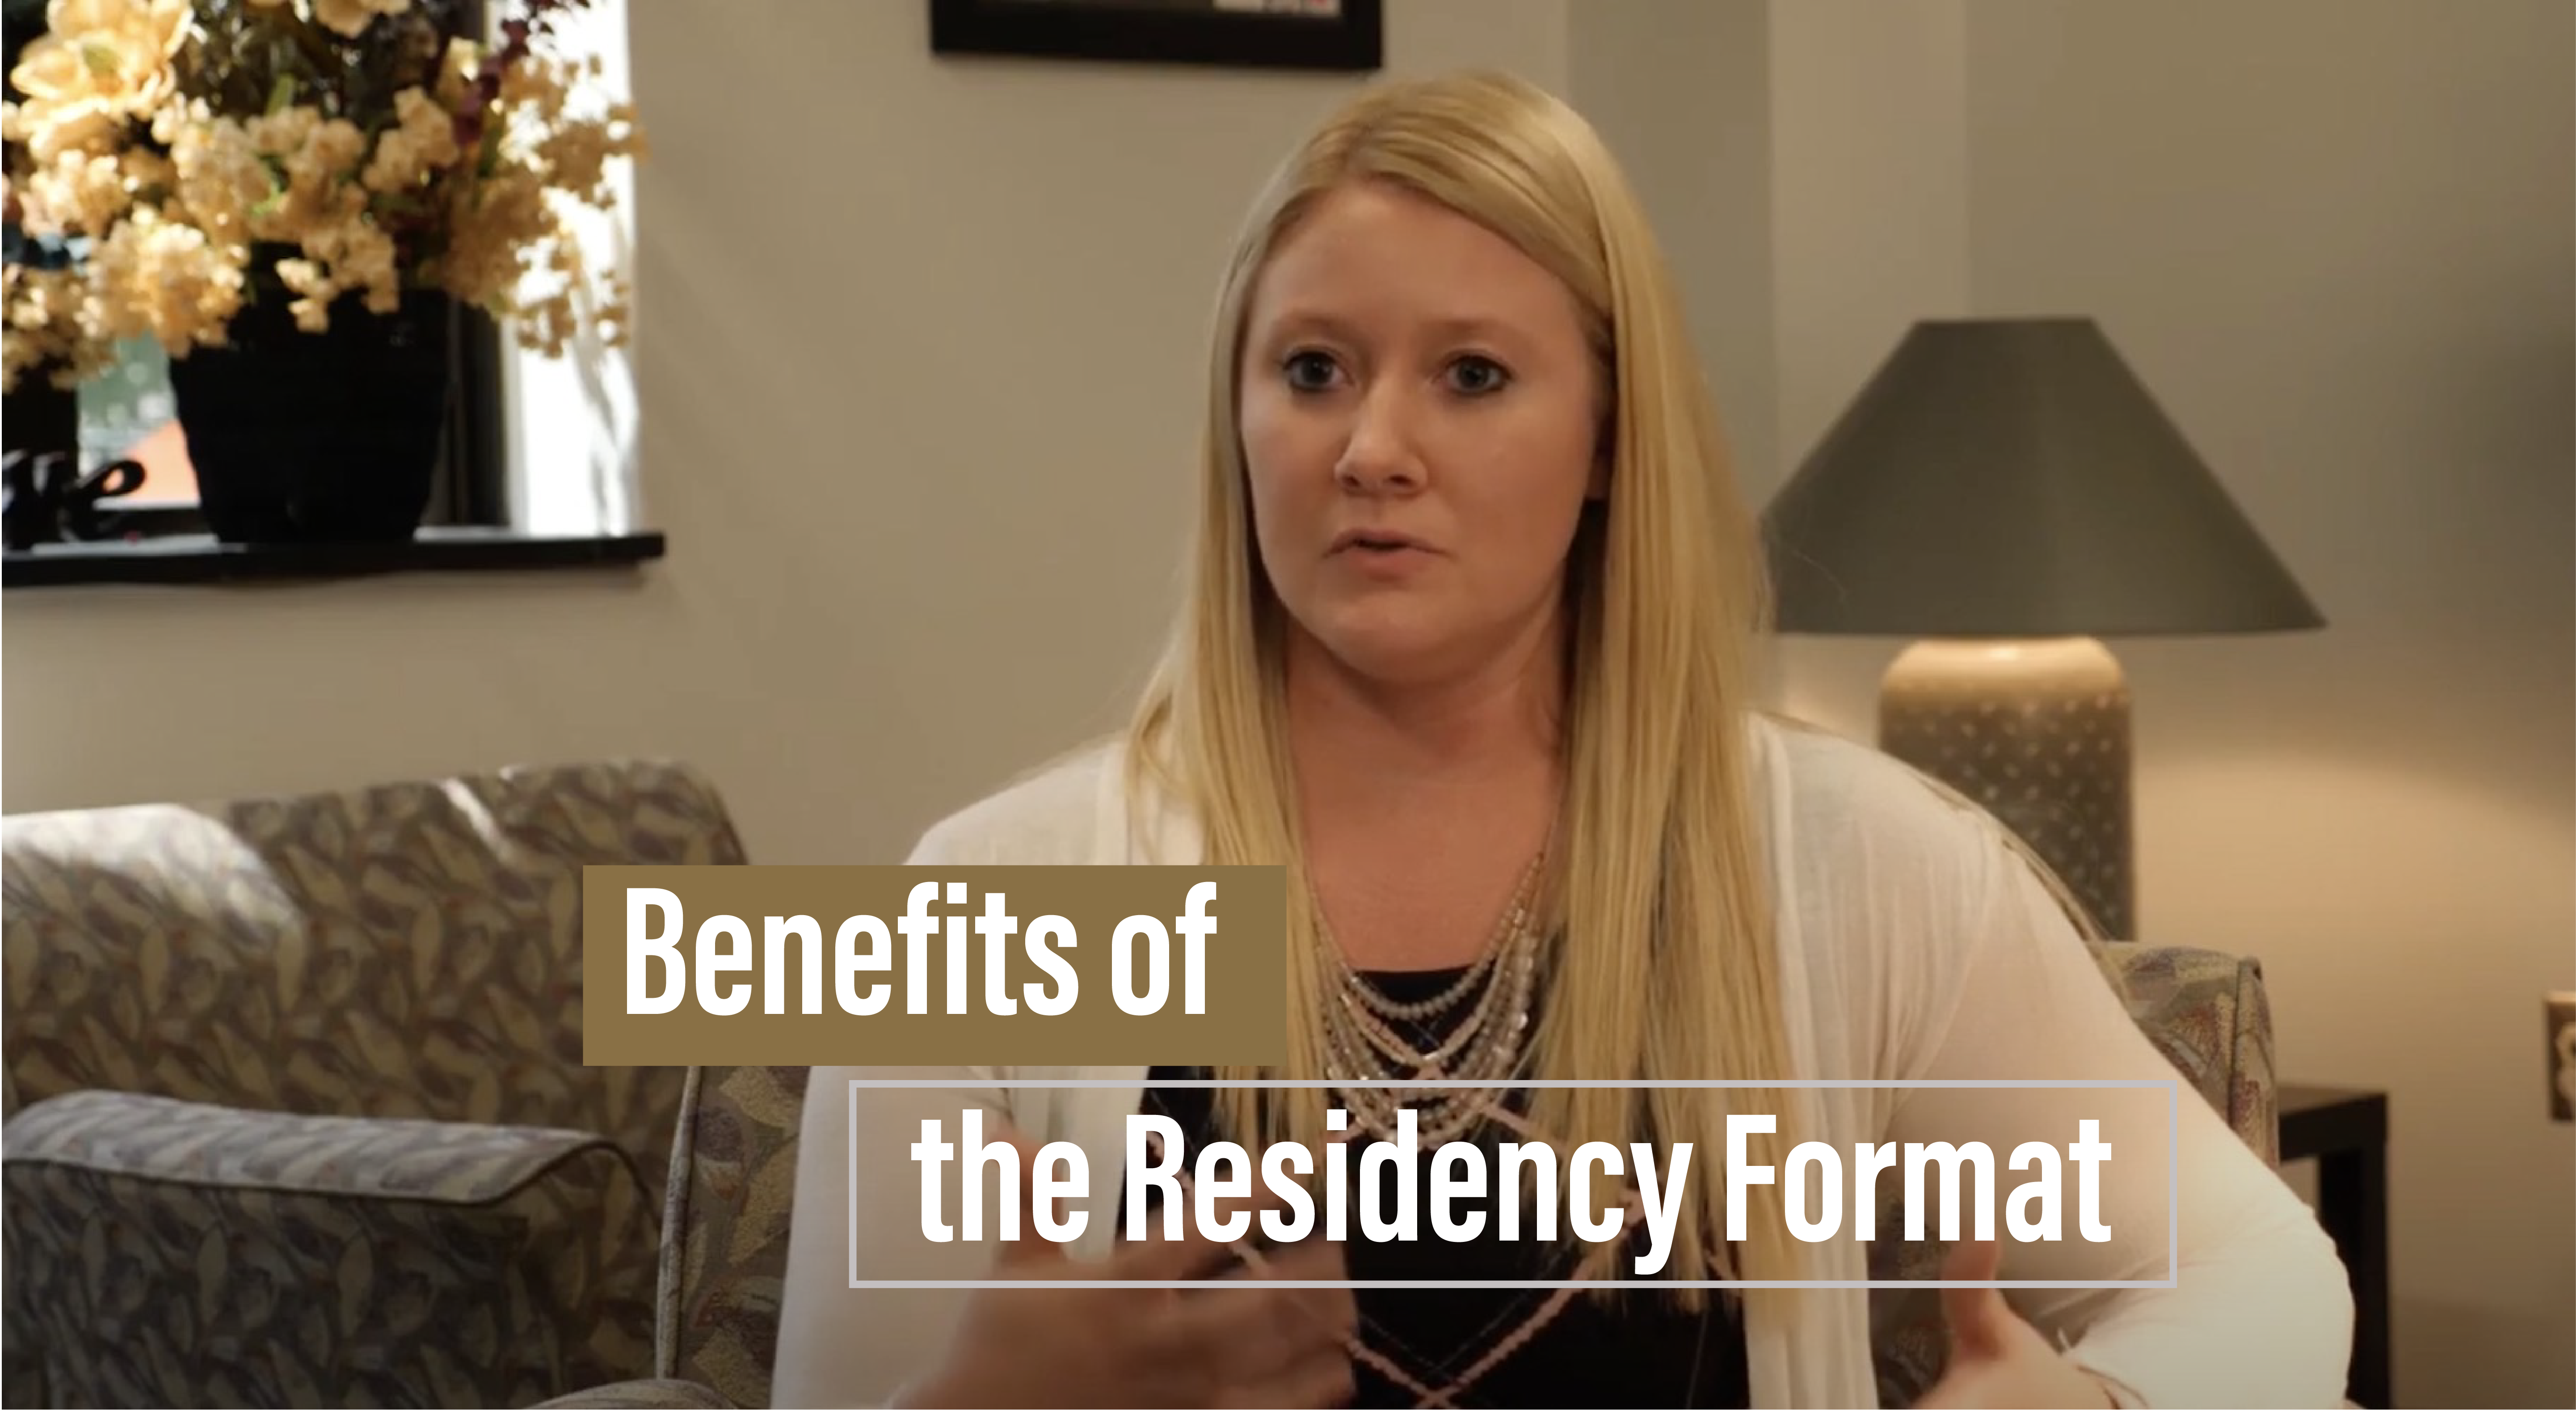 Benefits of the residency format